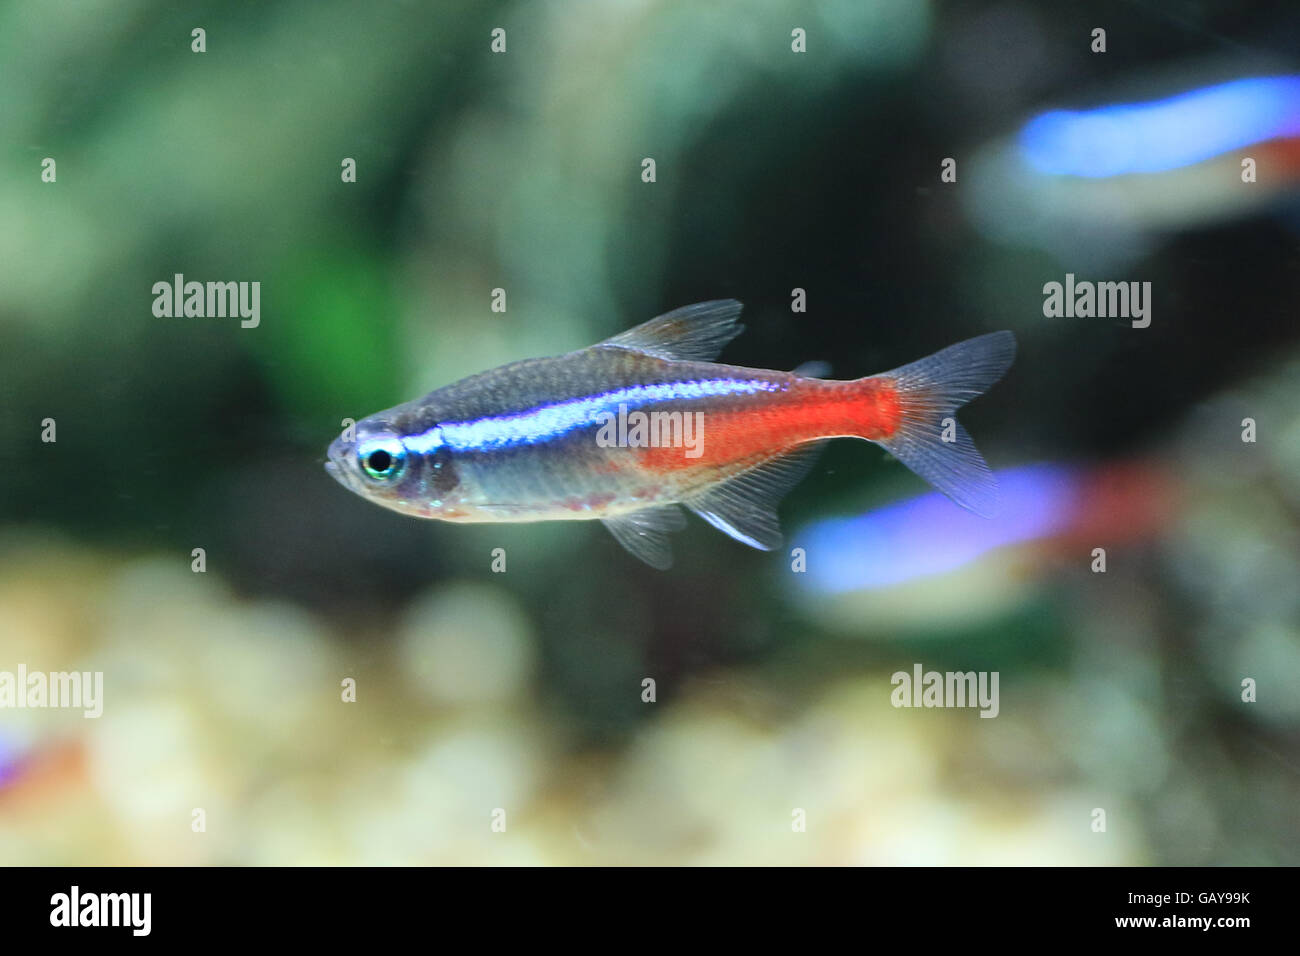 The neon tetra (Paracheirodon innesi) is a freshwater fish of the characin family (family Characidae) of order Characiformes. The type species of its genus, it is native to blackwater or clearwater streams in southeastern Colombia, eastern Peru, and western Brazil, including the tributaries of the Solimões where the water is between 20 and 26 °C (68 and 79 °F).[2] It is not found in the whitewater rivers of Andean origin. Its bright colouring makes the fish visible to conspecifics in the dark blackwater streams,[3] and is also the main reason for its popularity among tropical fish hobbyists. Stock Photo